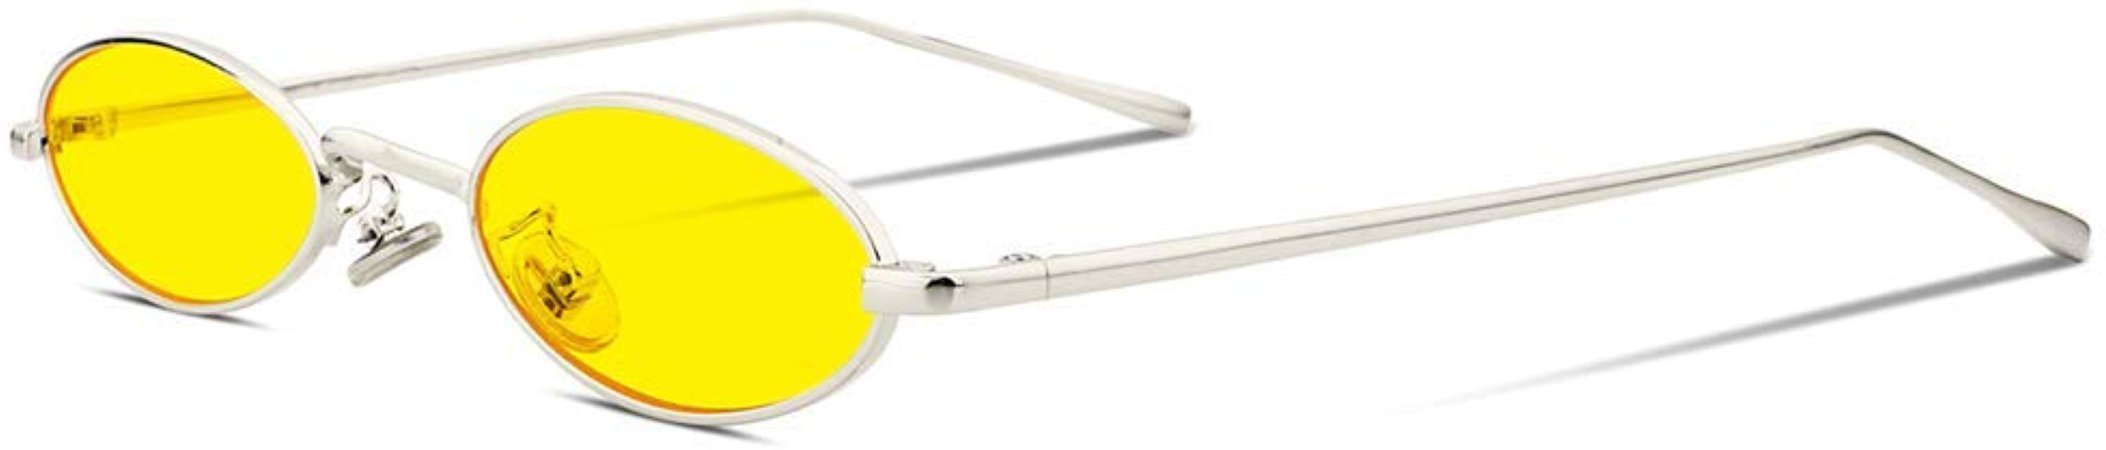 Amazon.com: Vintage Oval Sunglasses for Women Slender Metal Frame Candy Colors Yellow: Clothing